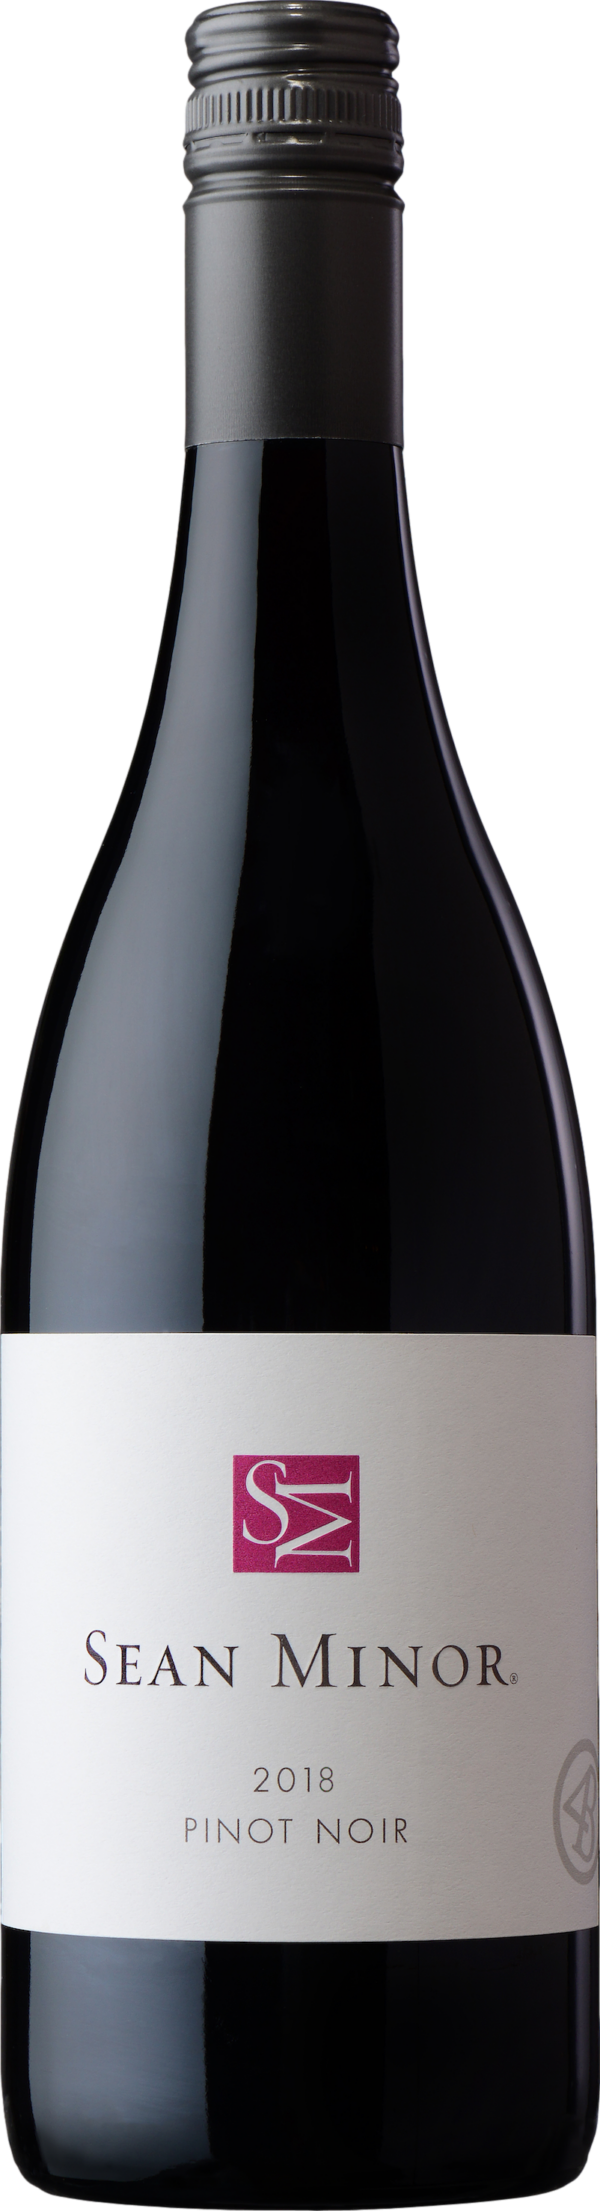 Product image of Sean Minor 4B Pinot Noir 2018 from 8wines